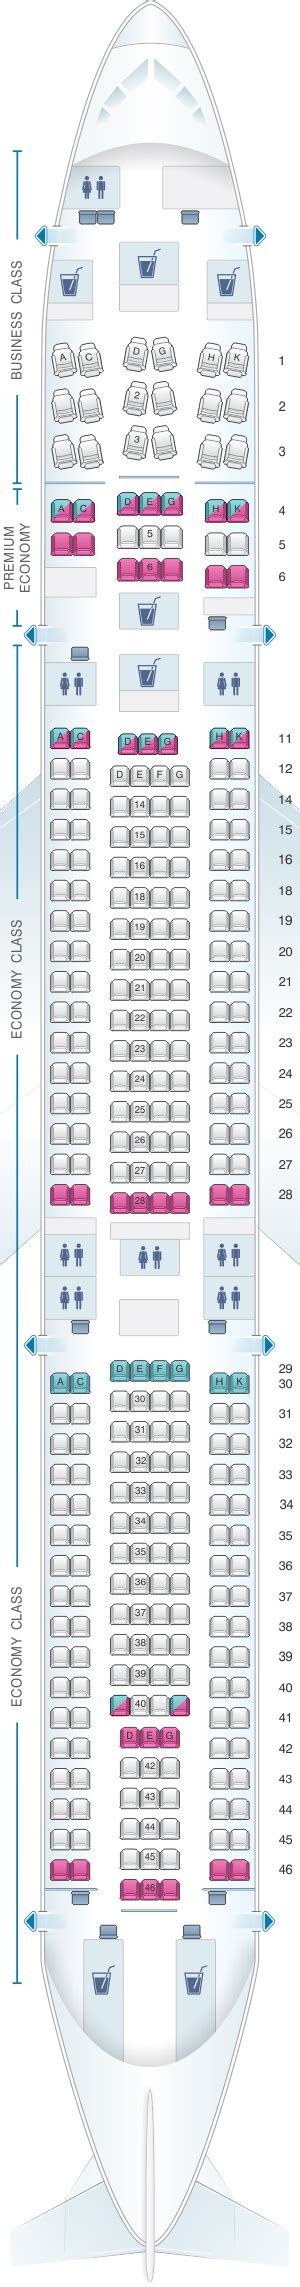 Airbus A340 600 Seat Map